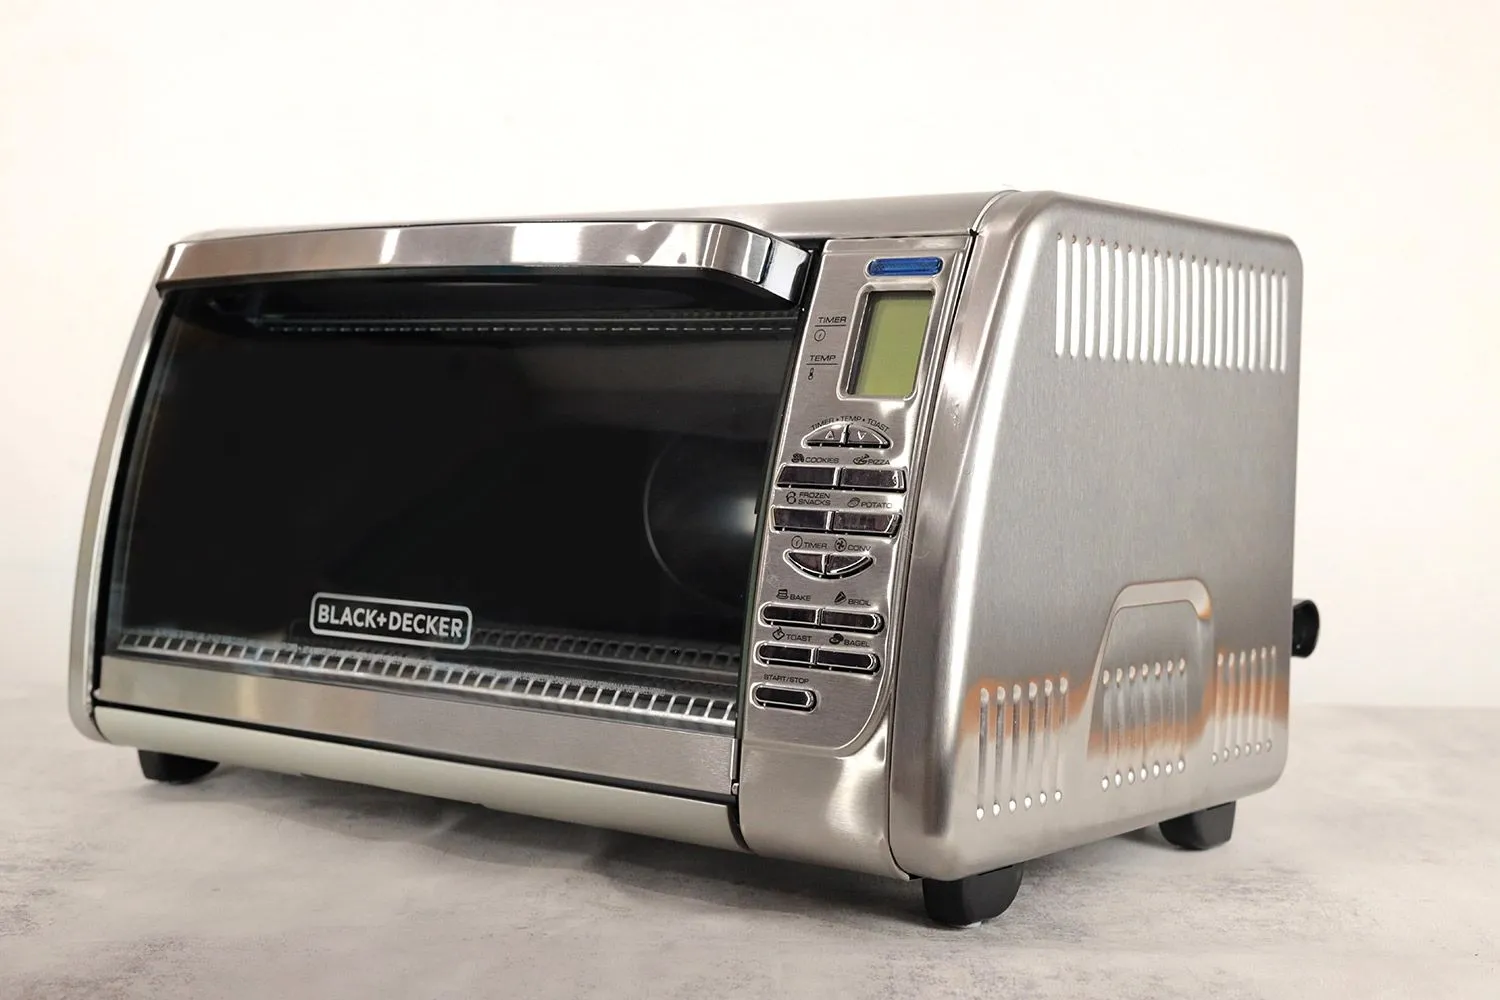 Black And Decker Convection Toaster Oven (CTO6335S) In-depth Review -  Healthy Kitchen 101